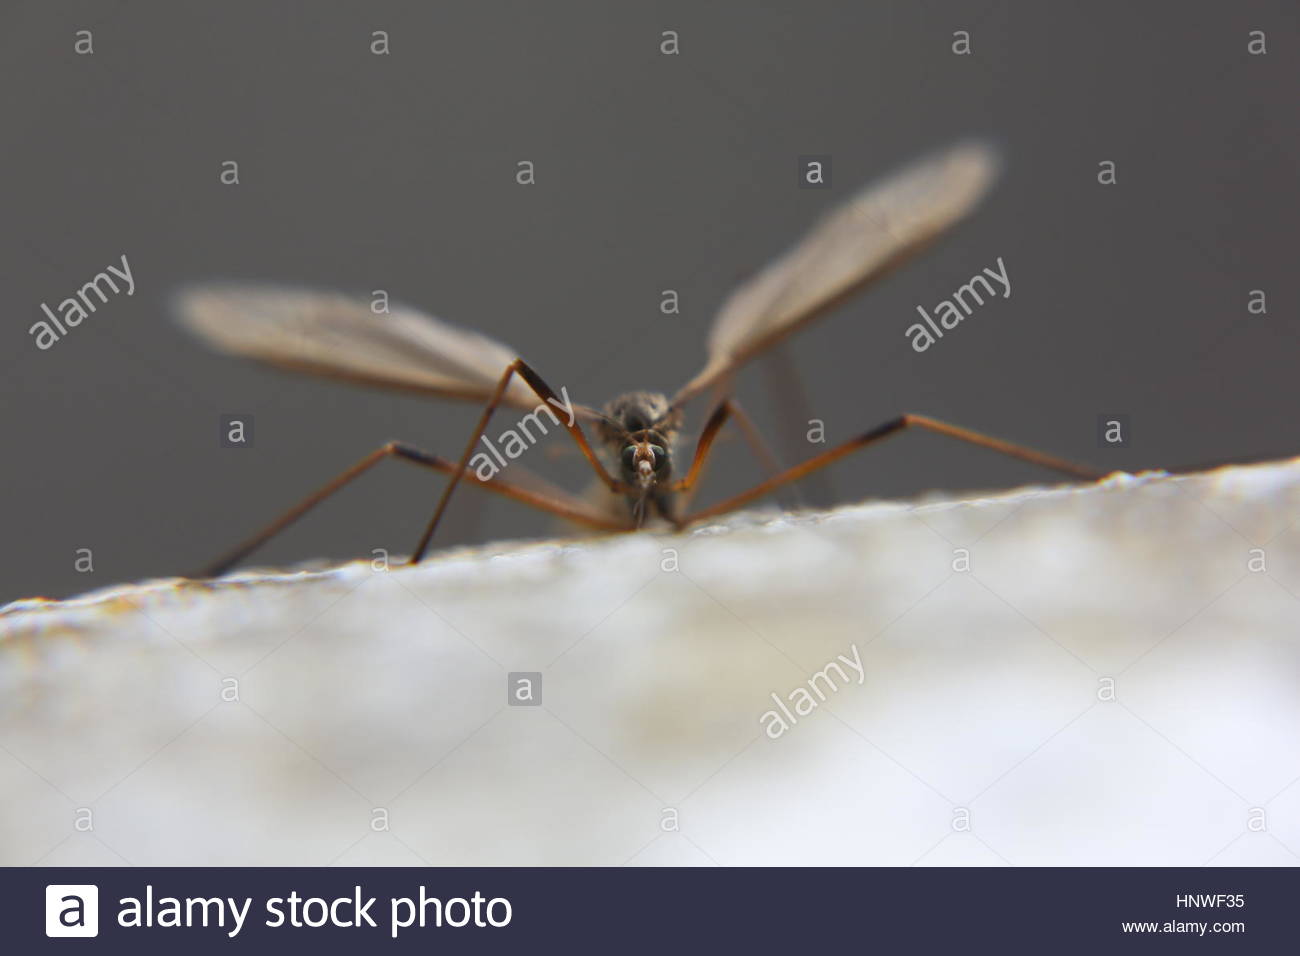 An insect, most likely a crane fly climbs up a gravestone in ireland Stock Photo